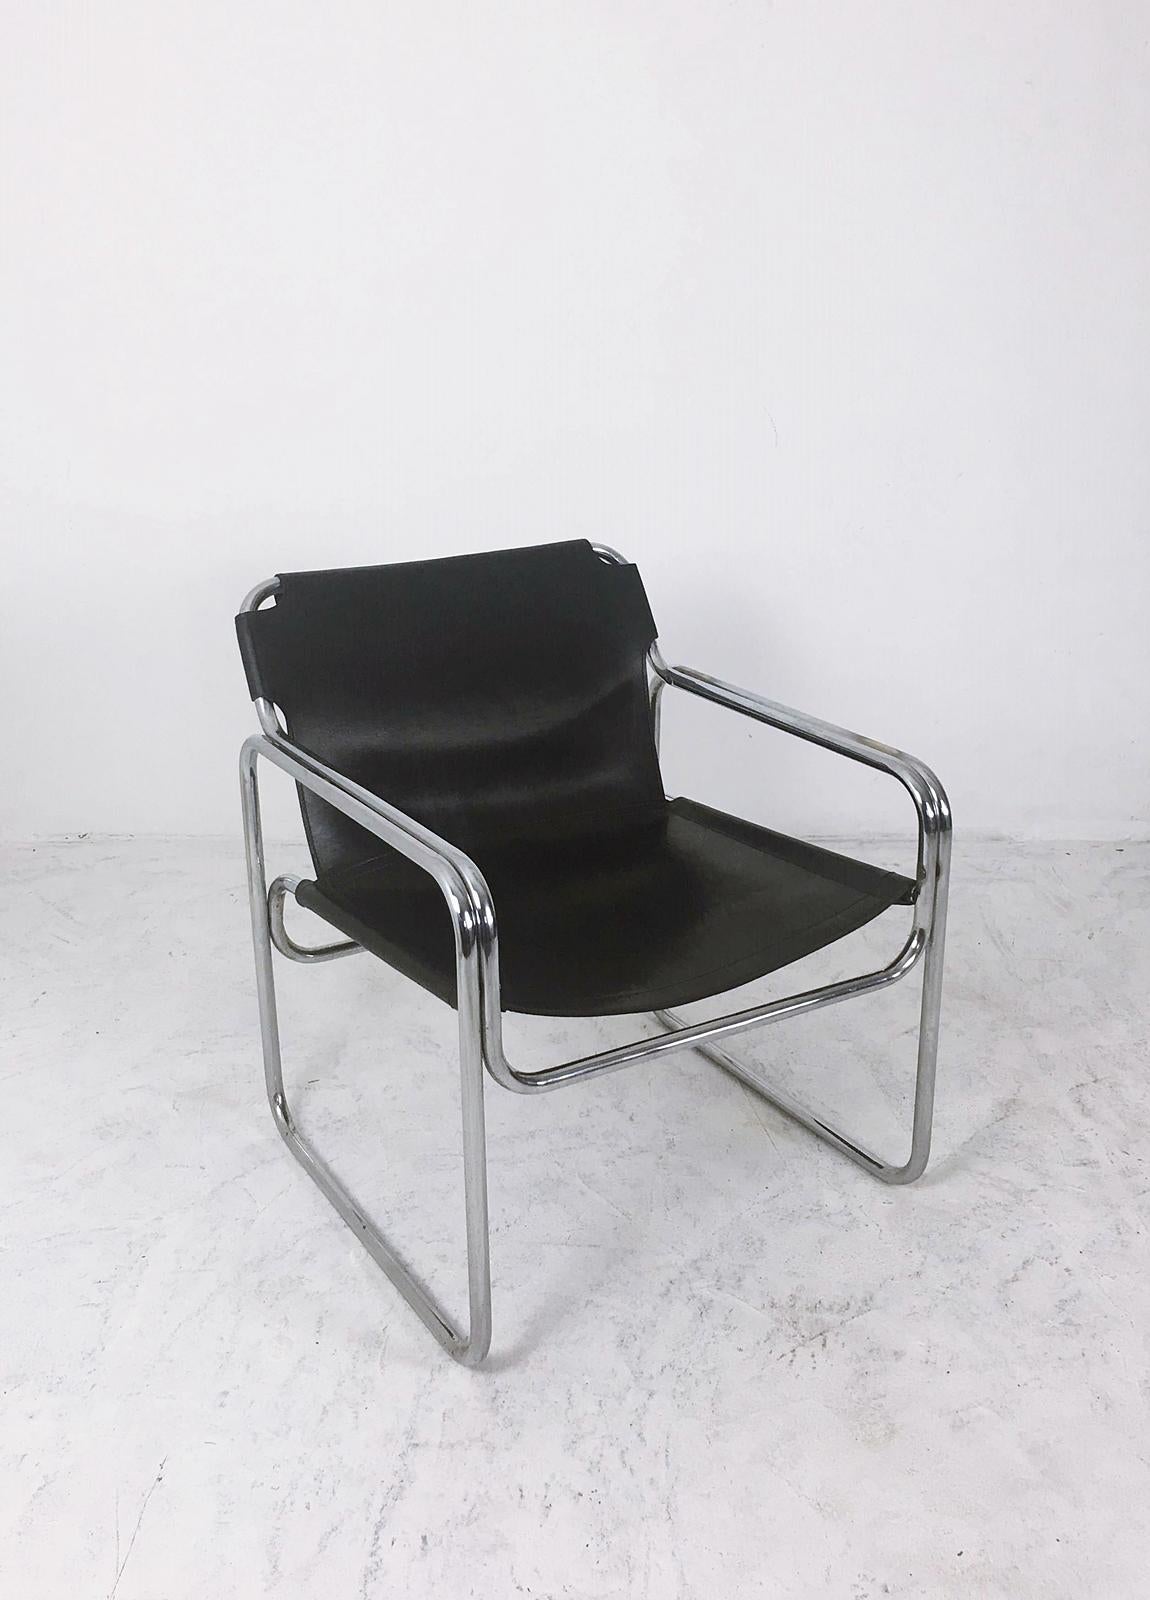 Unique piece of design is a great example of the radical Bauhaus aesthetic. Original, yet simple and functional this particular chair was produced in 1960. Superb patina to the saddle leather. The combination of this design and these materials stays